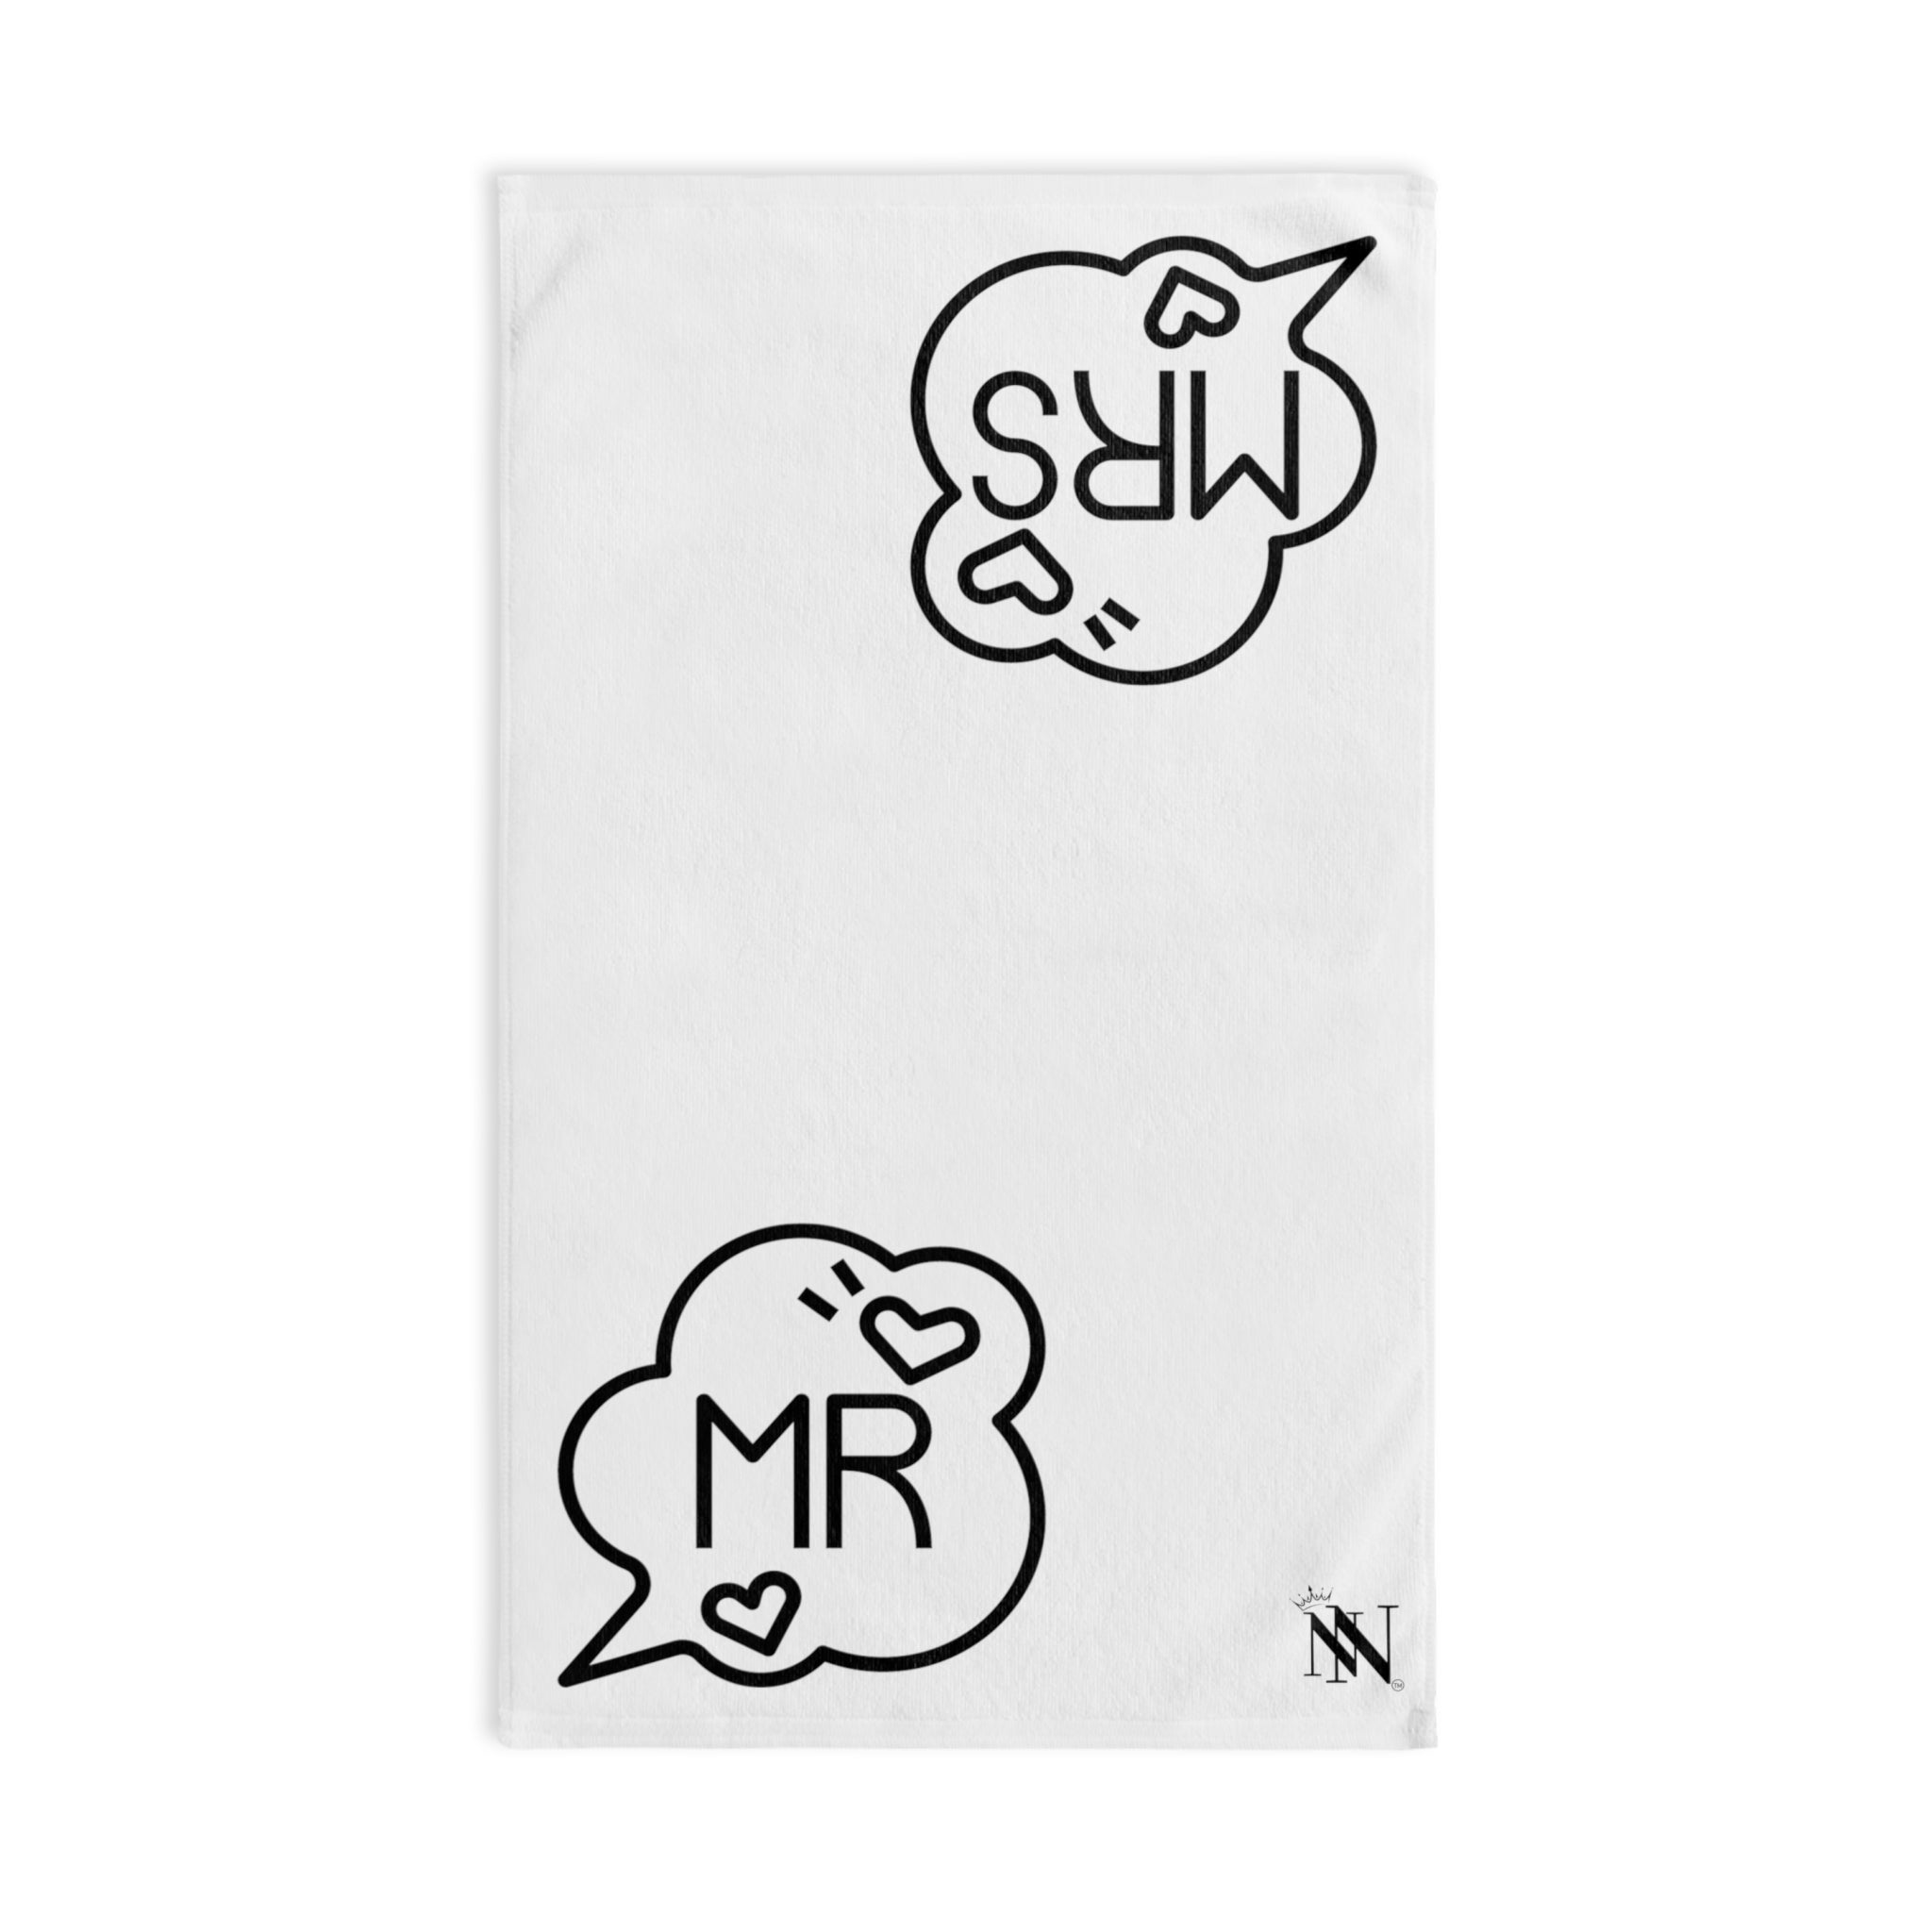 Mr Mrs Caption White | Funny Gifts for Men - Gifts for Him - Birthday Gifts for Men, Him, Her, Husband, Boyfriend, Girlfriend, New Couple Gifts, Fathers & Valentines Day Gifts, Christmas Gifts NECTAR NAPKINS